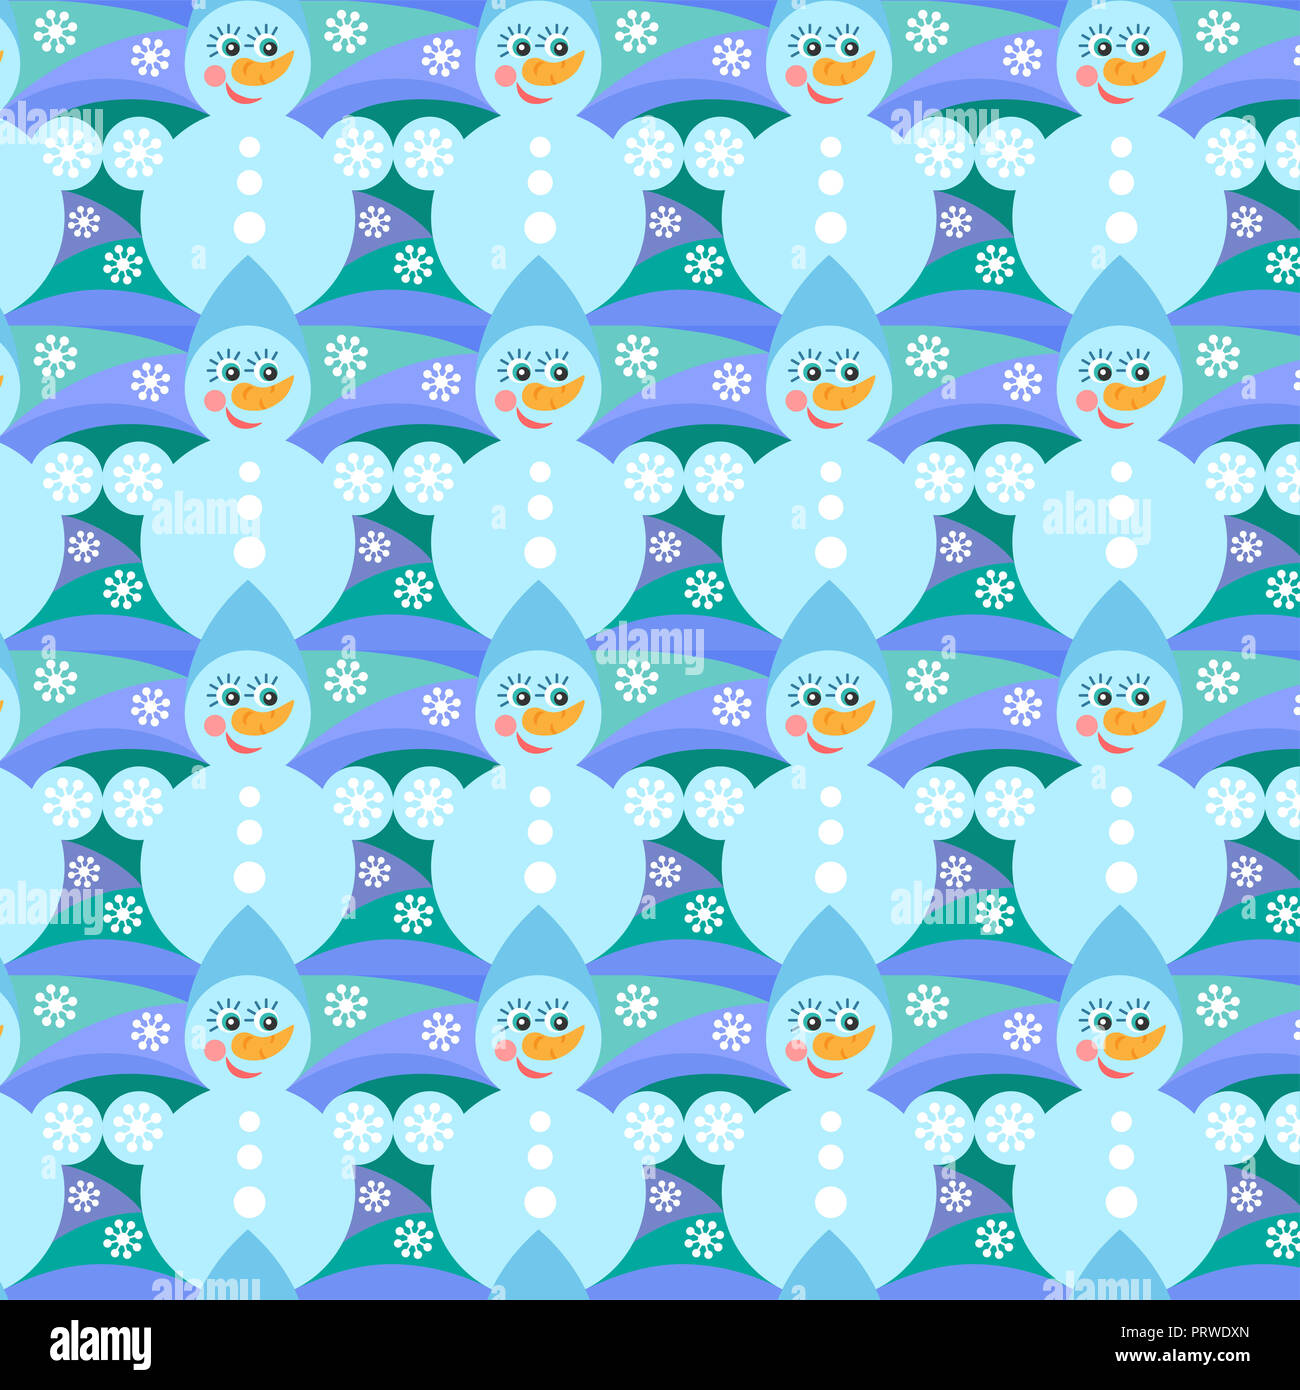 Christmas seamless pattern. Snowman and snowflakes on a blue background. Stock Photo